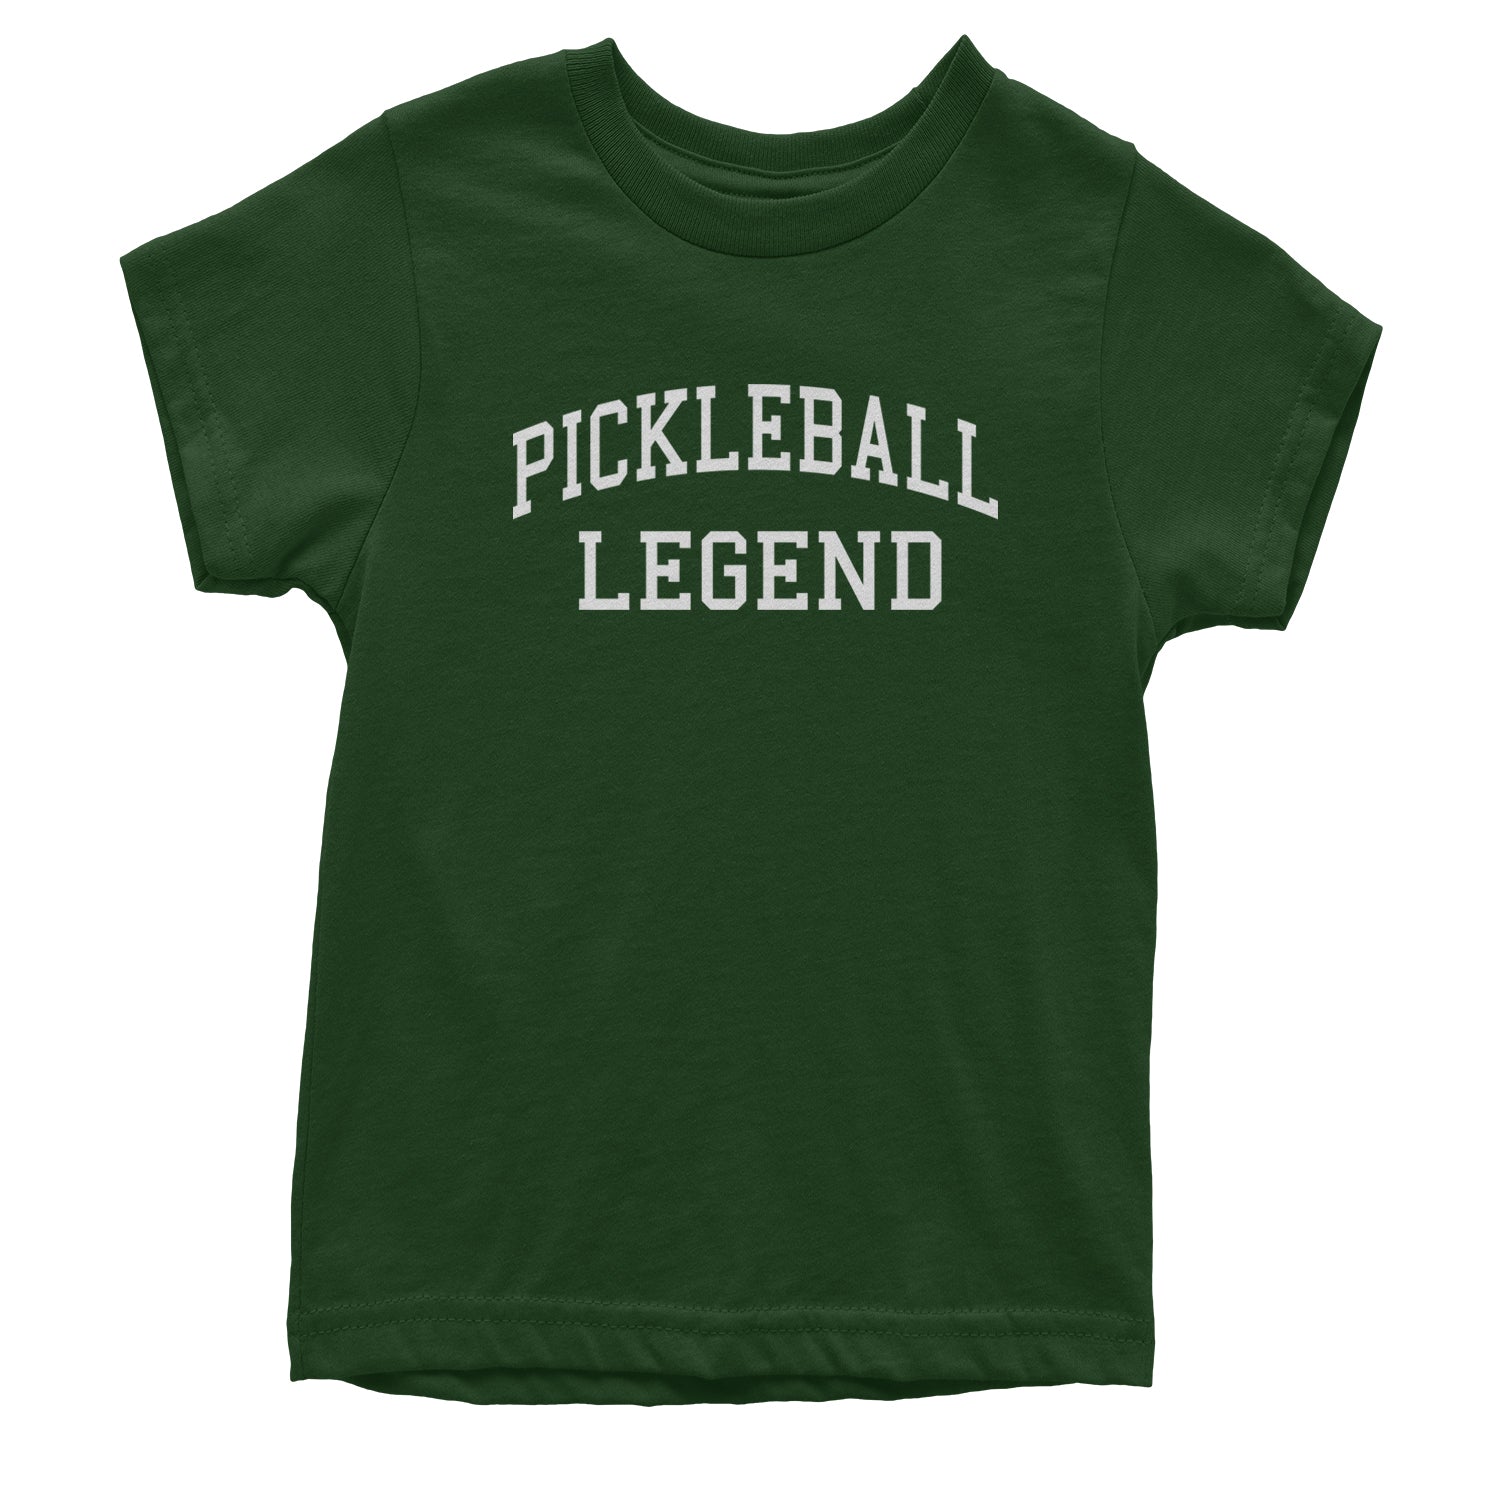 Pickleball Legend Youth T-shirt ball, dink, dinking, pickle, pickleball by Expression Tees